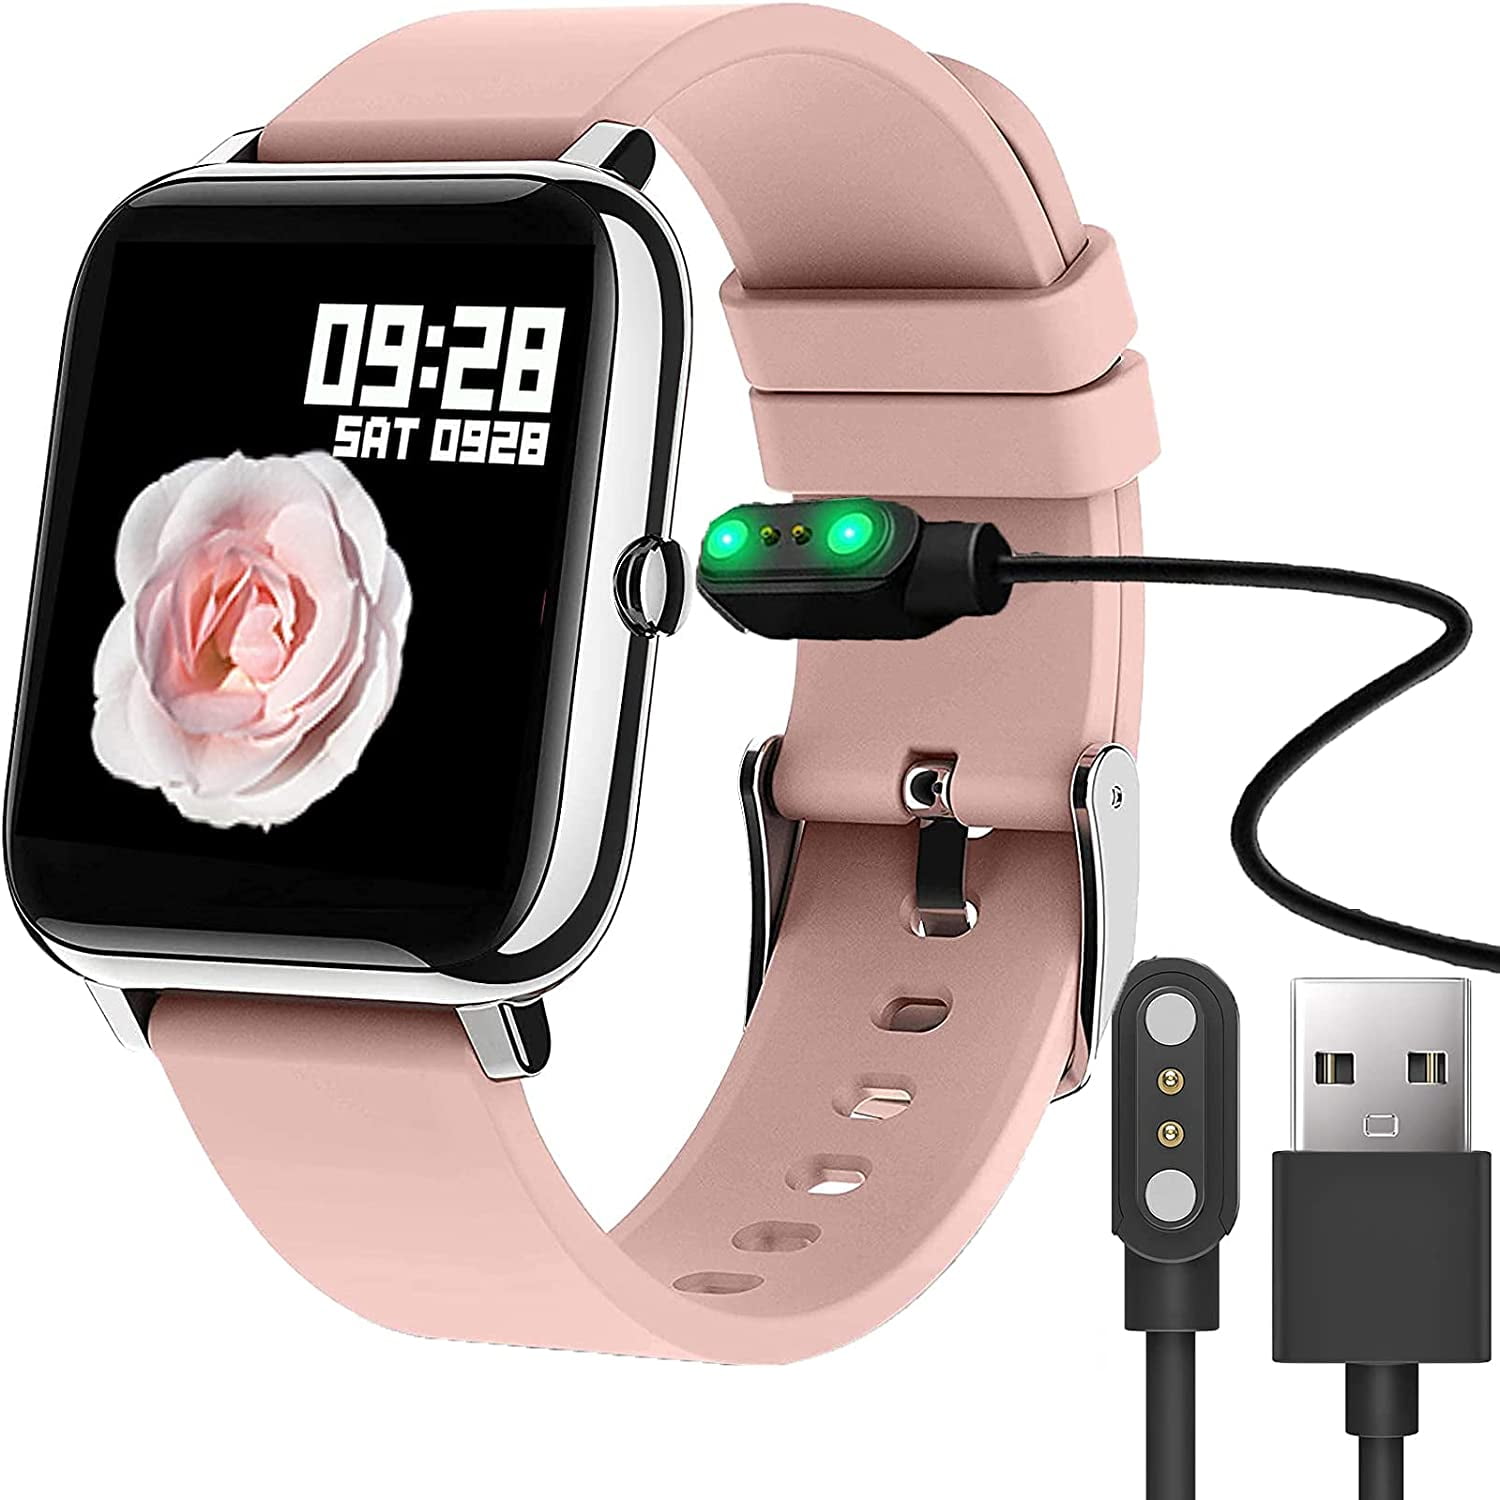 gennemse abstrakt Downtown Compatible with Donerton Smartwatch Charger, Magnetic USB Charging Cable  Replacement Charger for Donerton P22/Popglory - Walmart.com